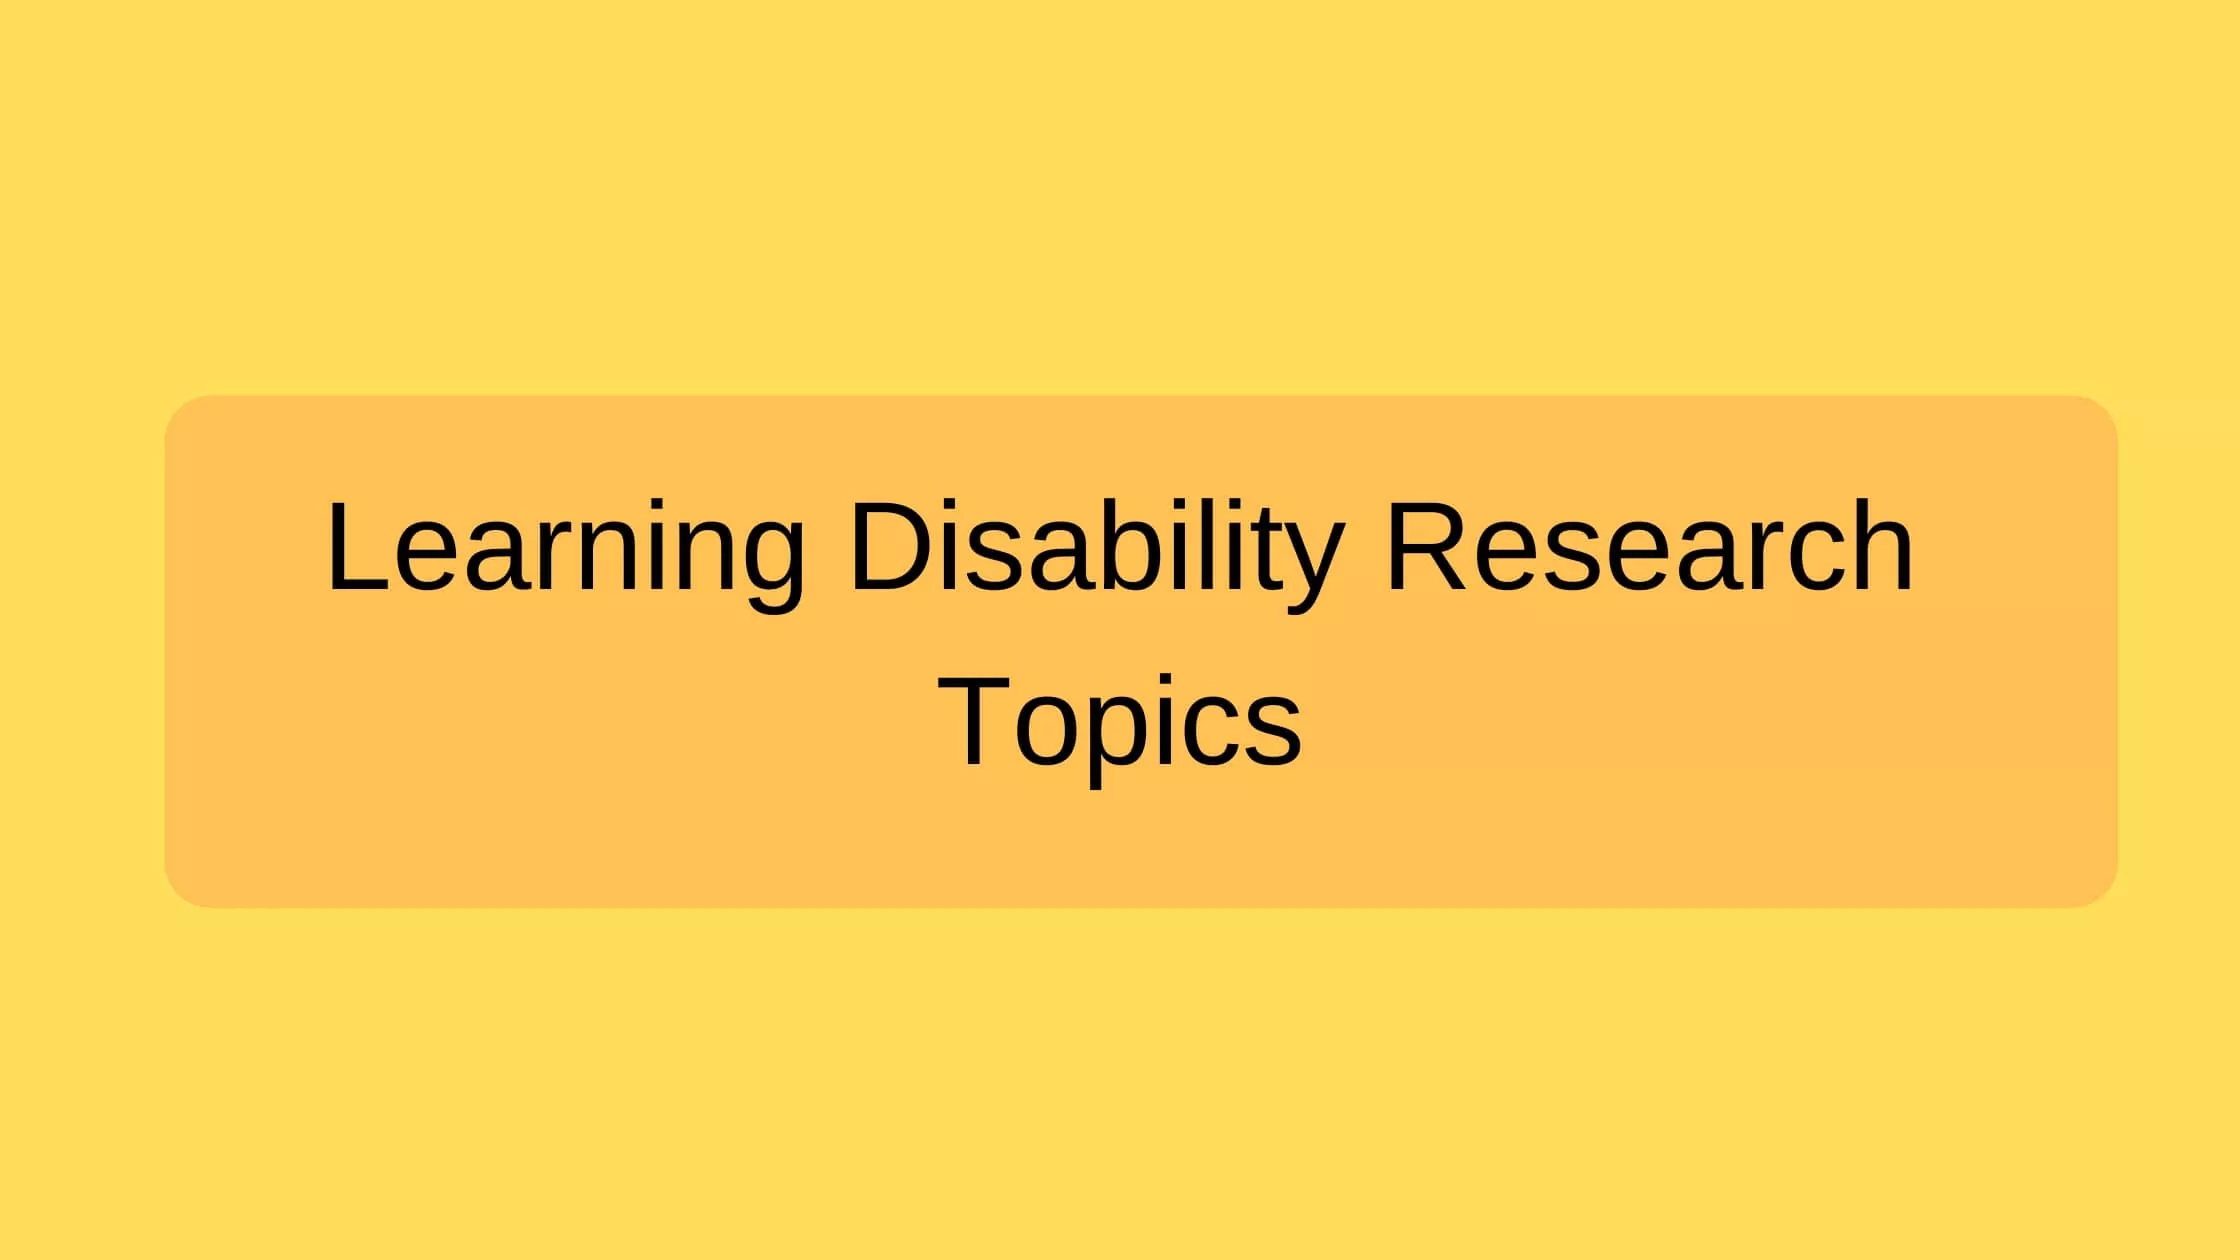 Learning Disability Research Topics